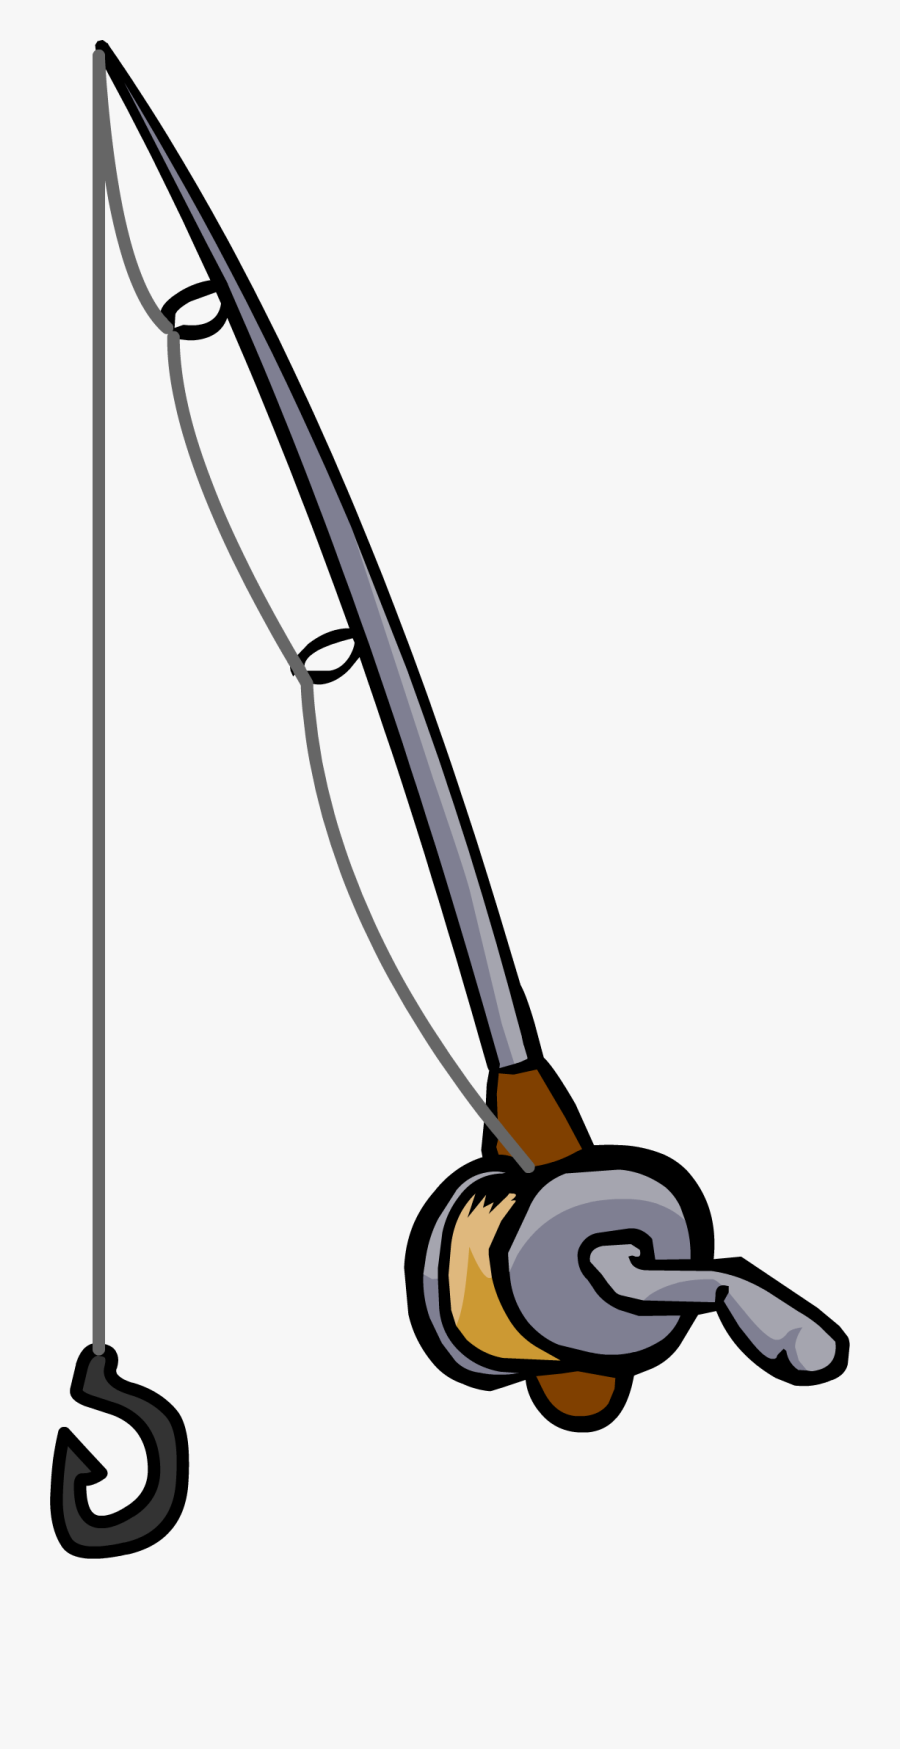 Fishing Rod - Fishing Pole Drawing Easy, Transparent Clipart